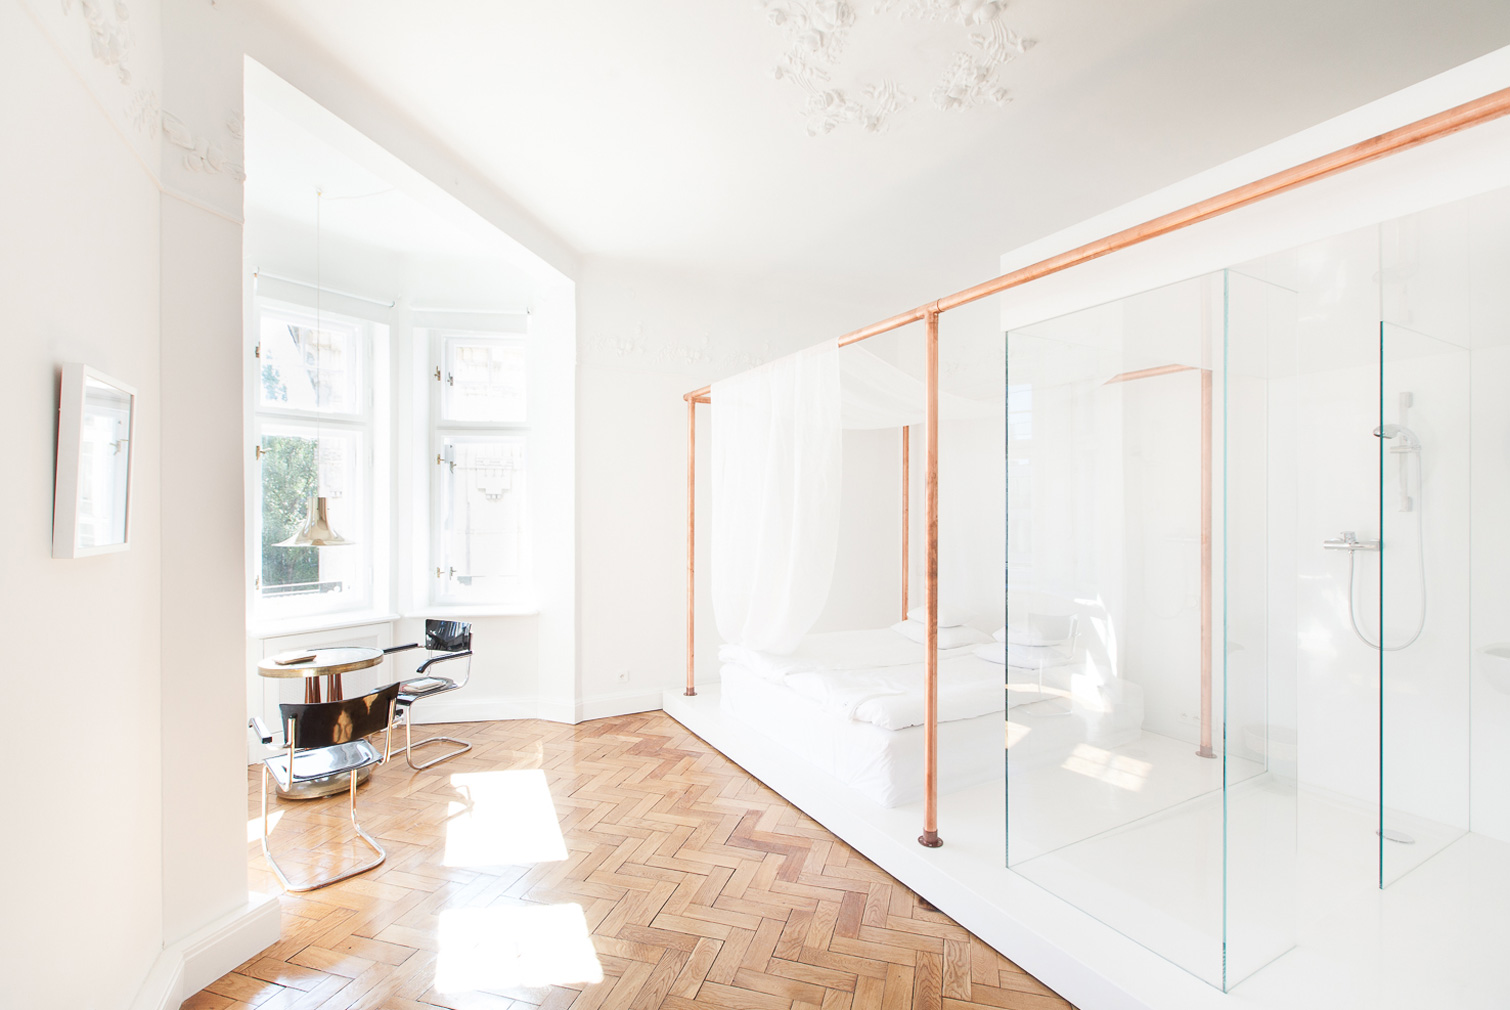 White bedroom suite with copper detailing and glass bathroom